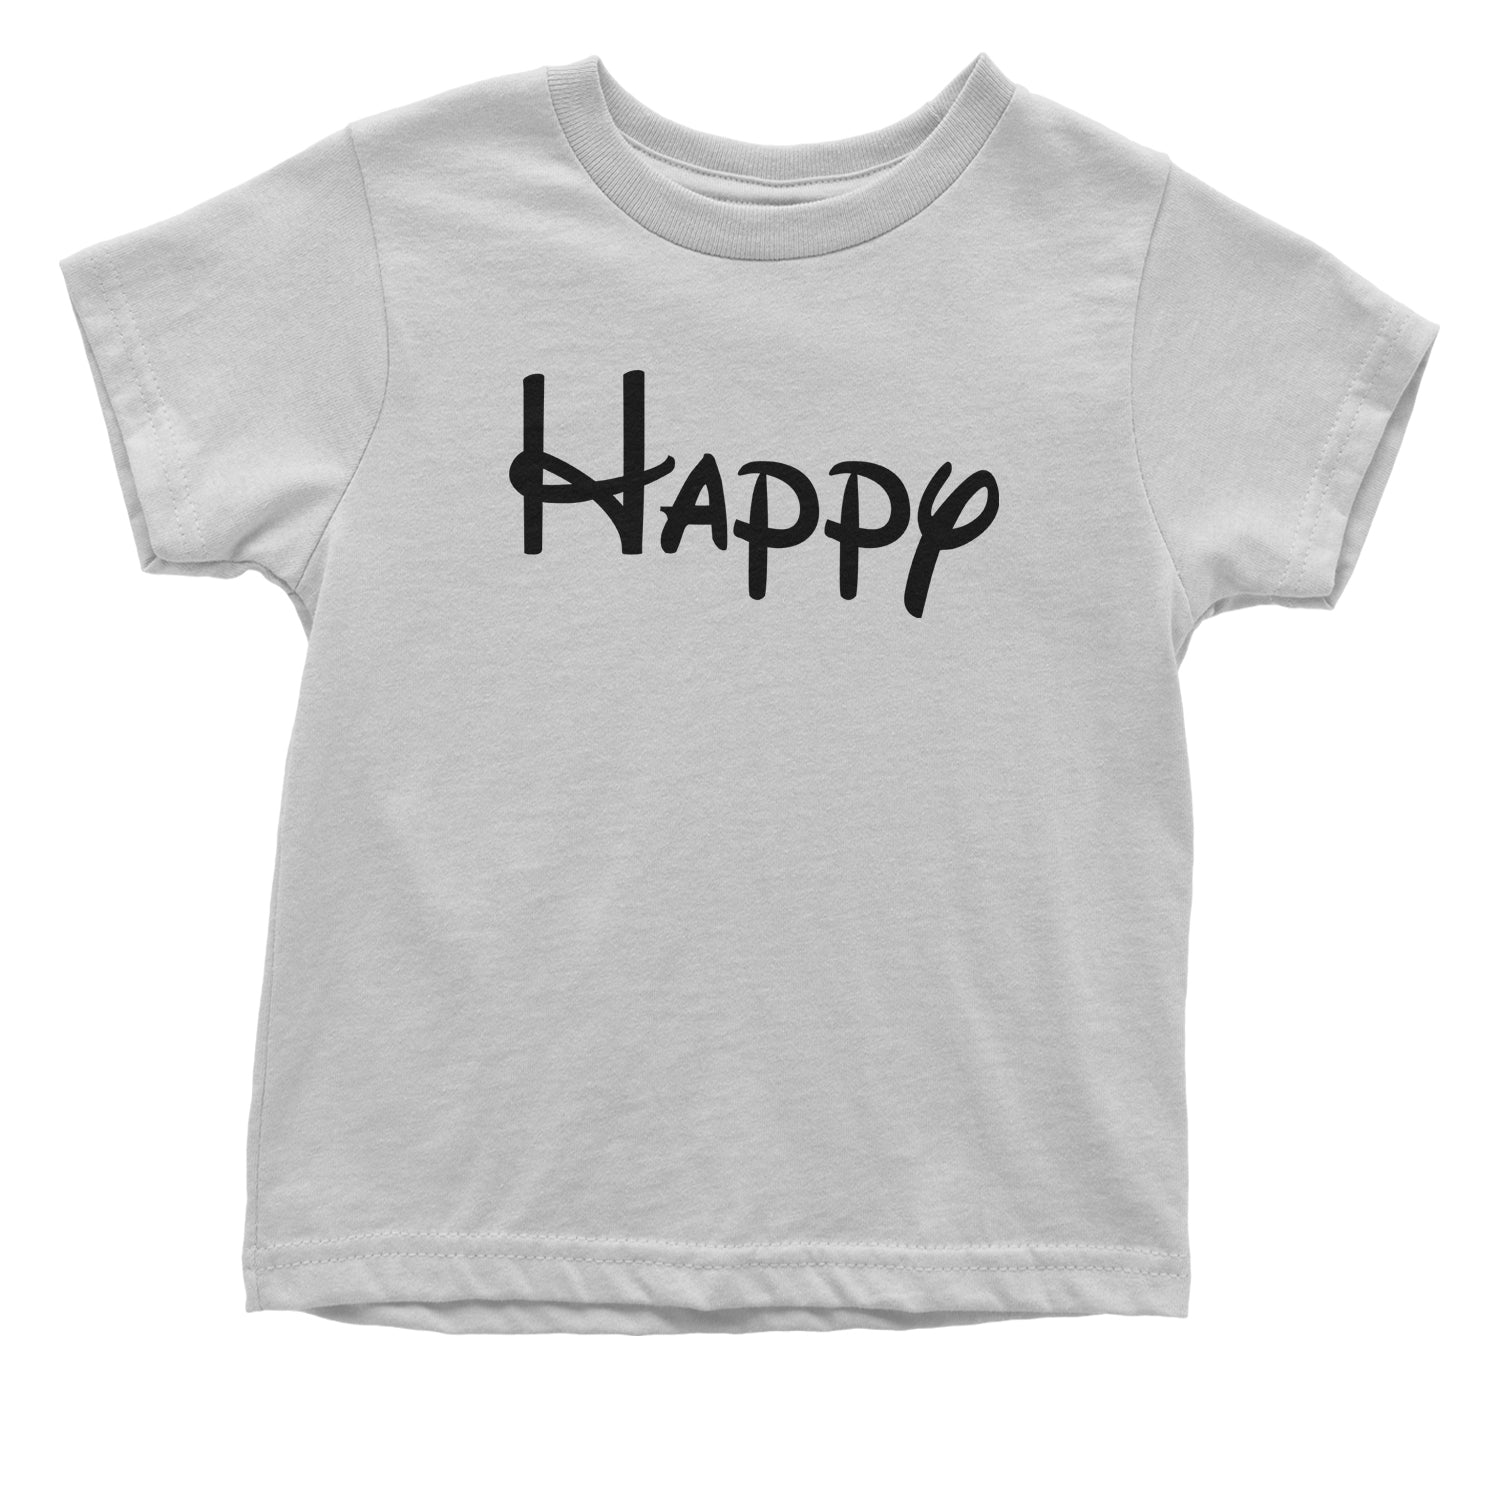 Happy - 7 Dwarfs Costume Toddler T-Shirt and, costume, dwarfs, group, halloween, matching, seven, snow, the, white by Expression Tees